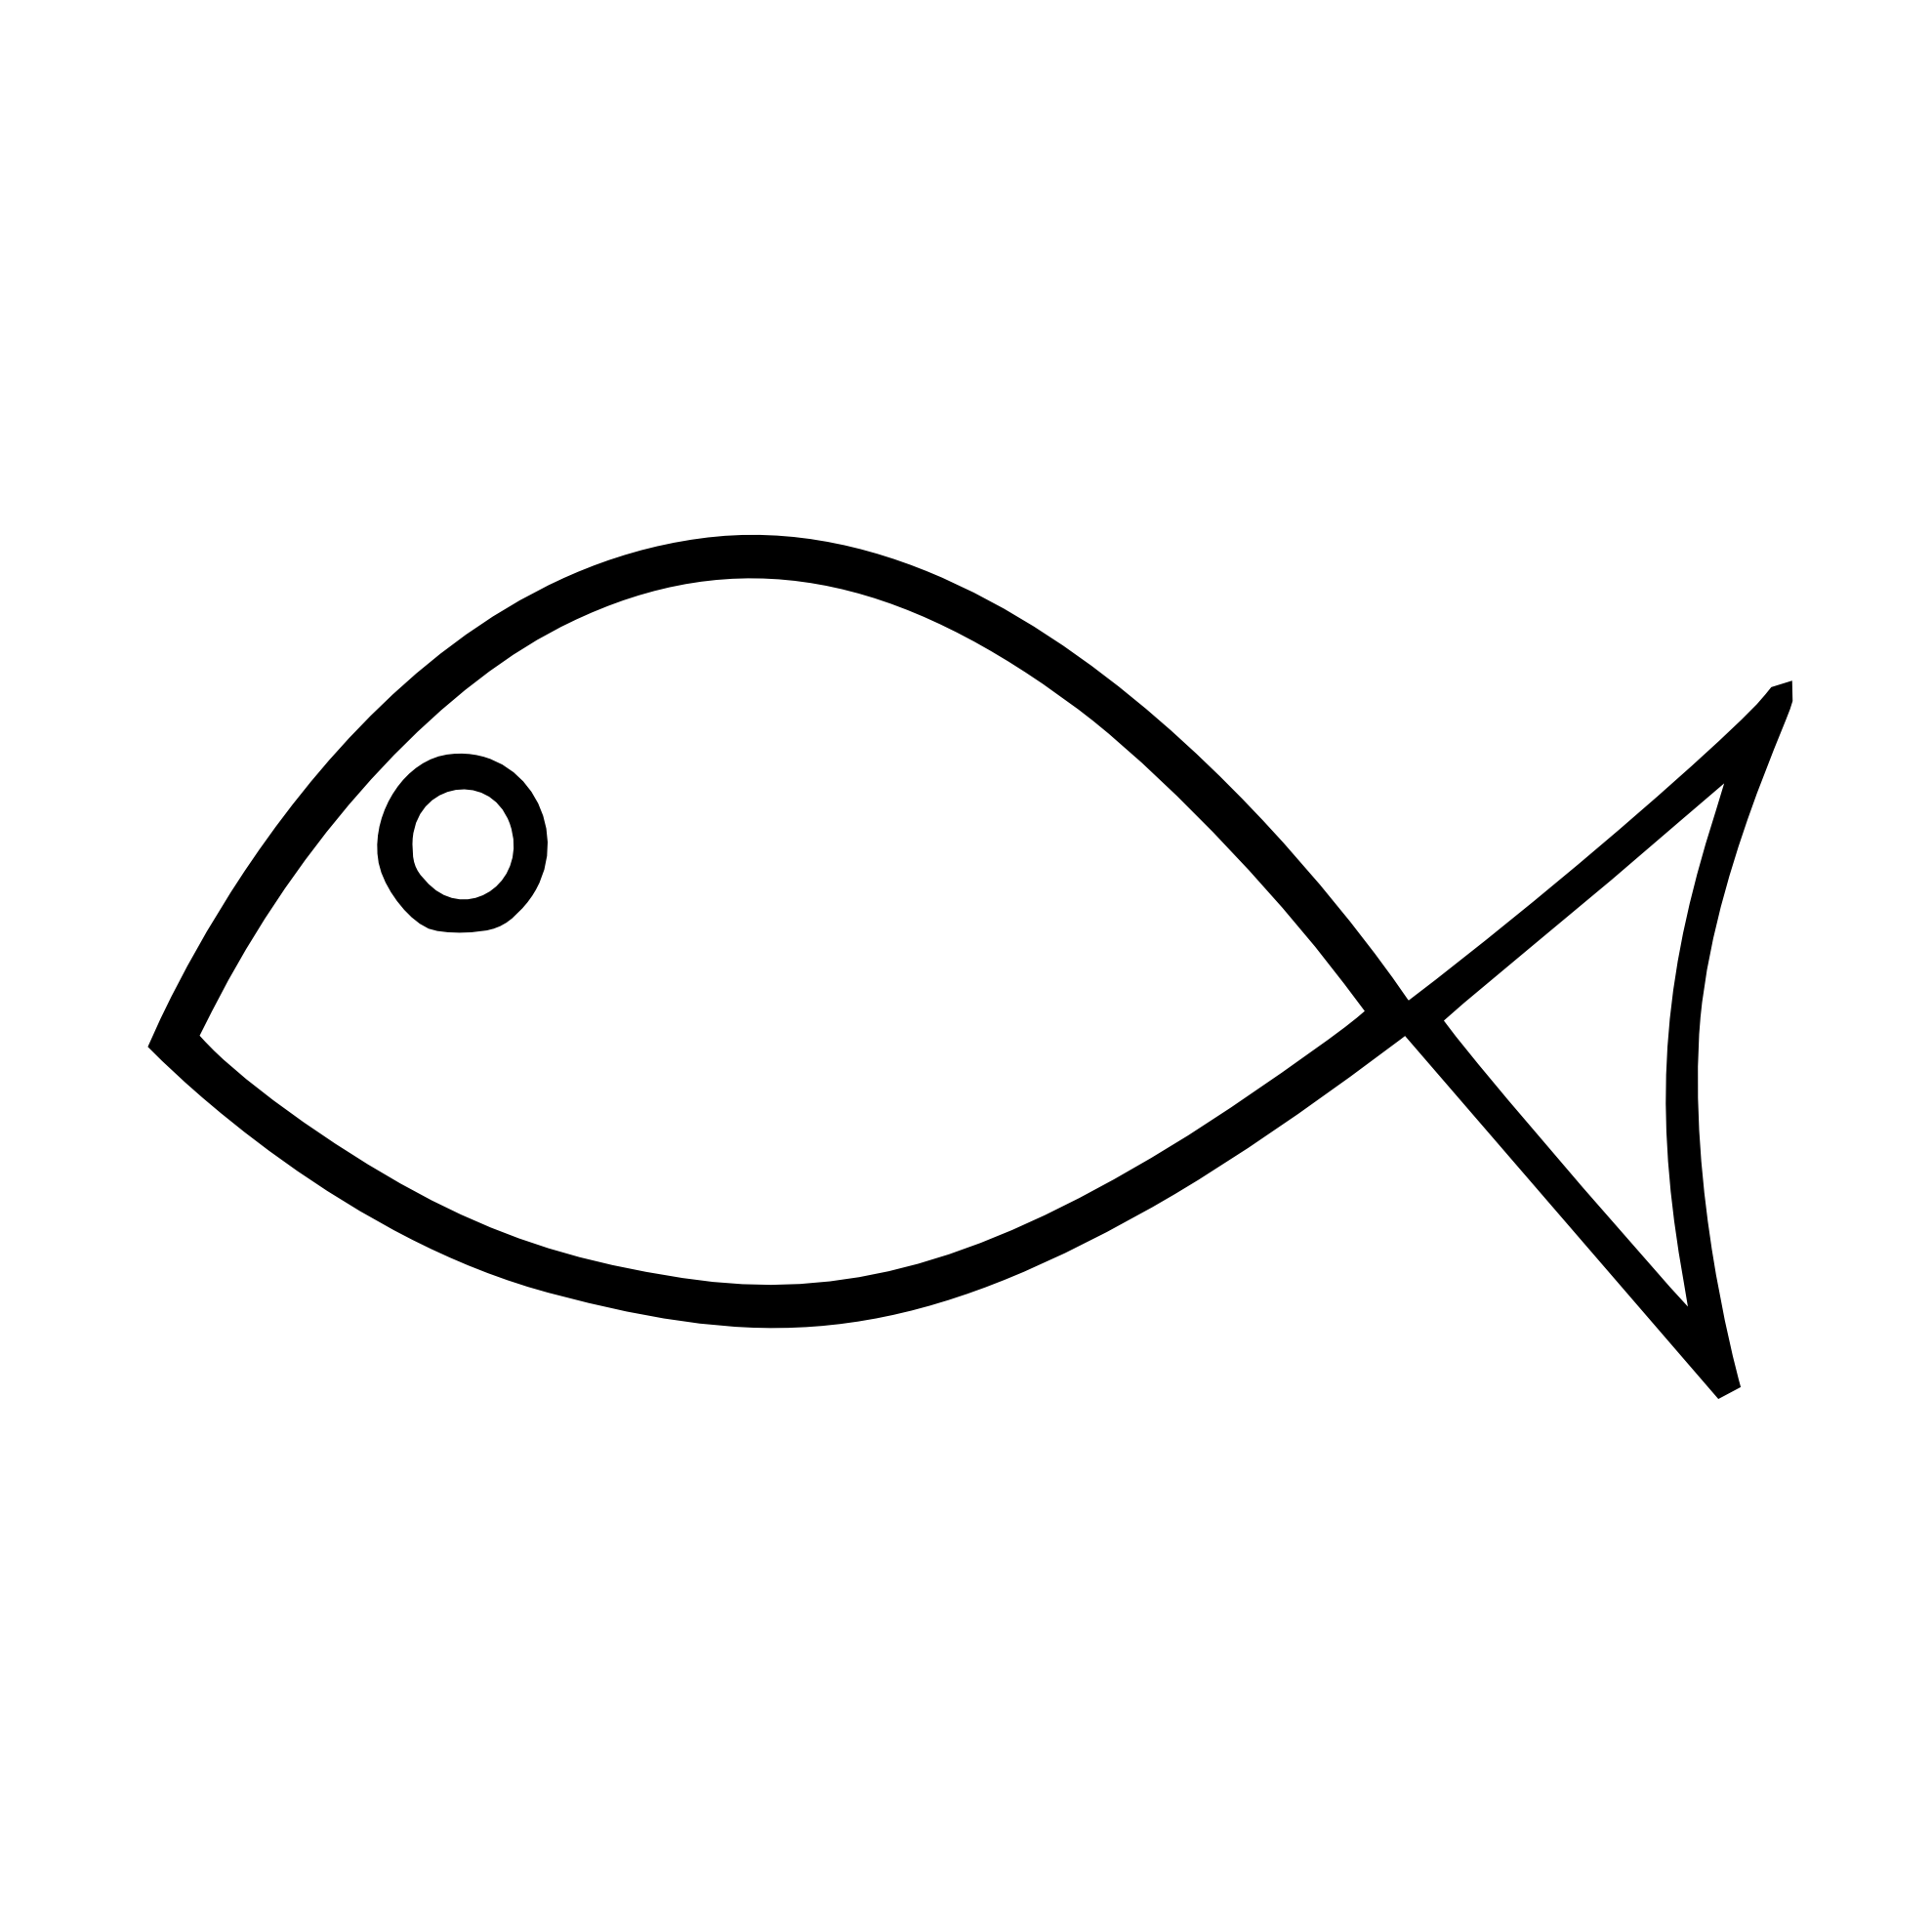 Angel fish outline clipart black and white